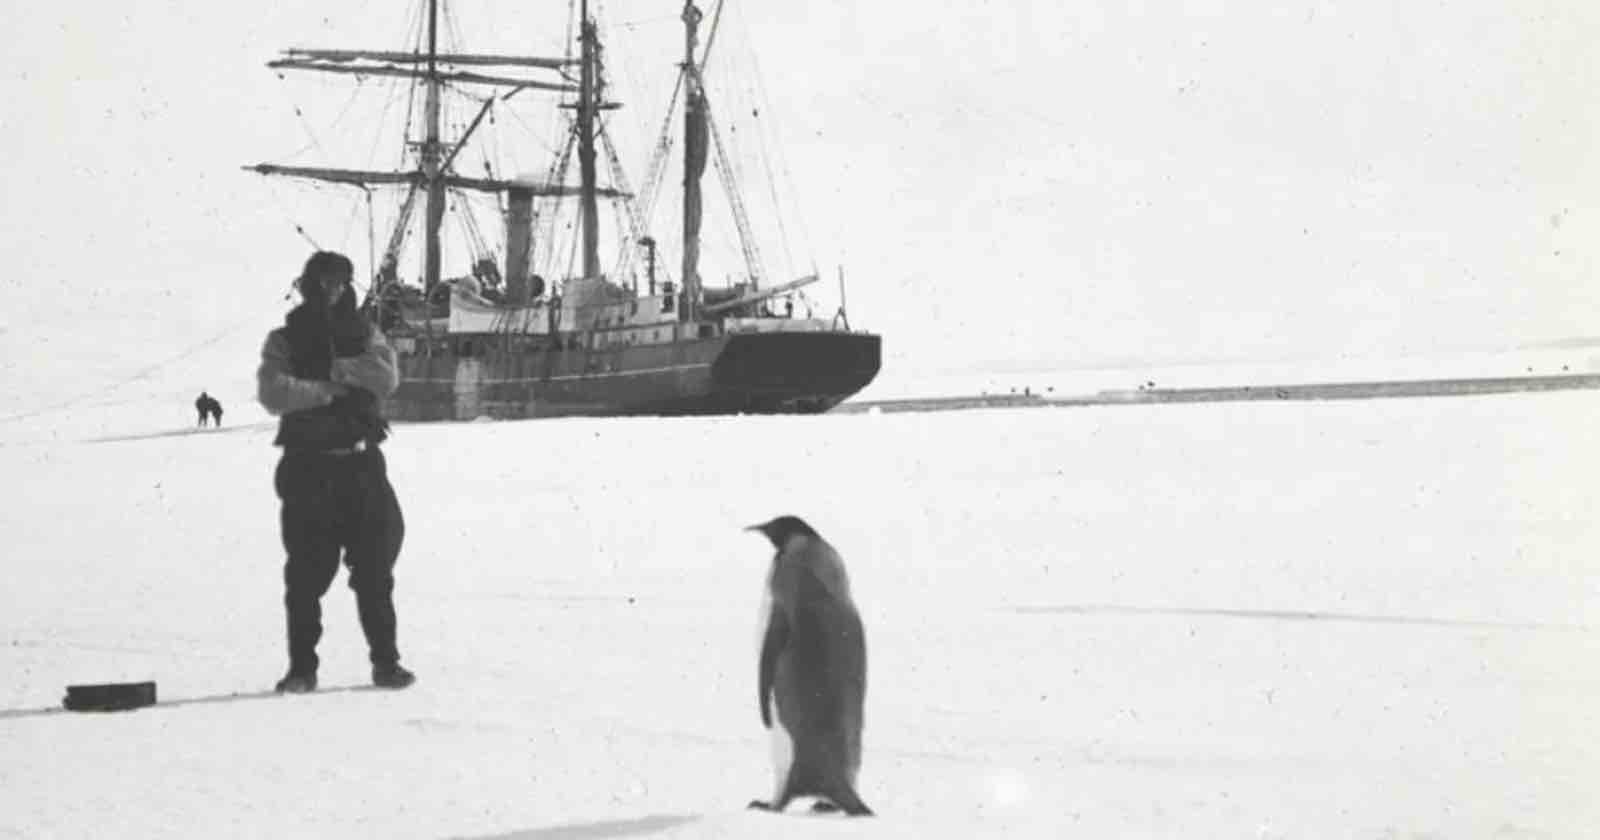  rare photos from early antarctic expeditions digitized 